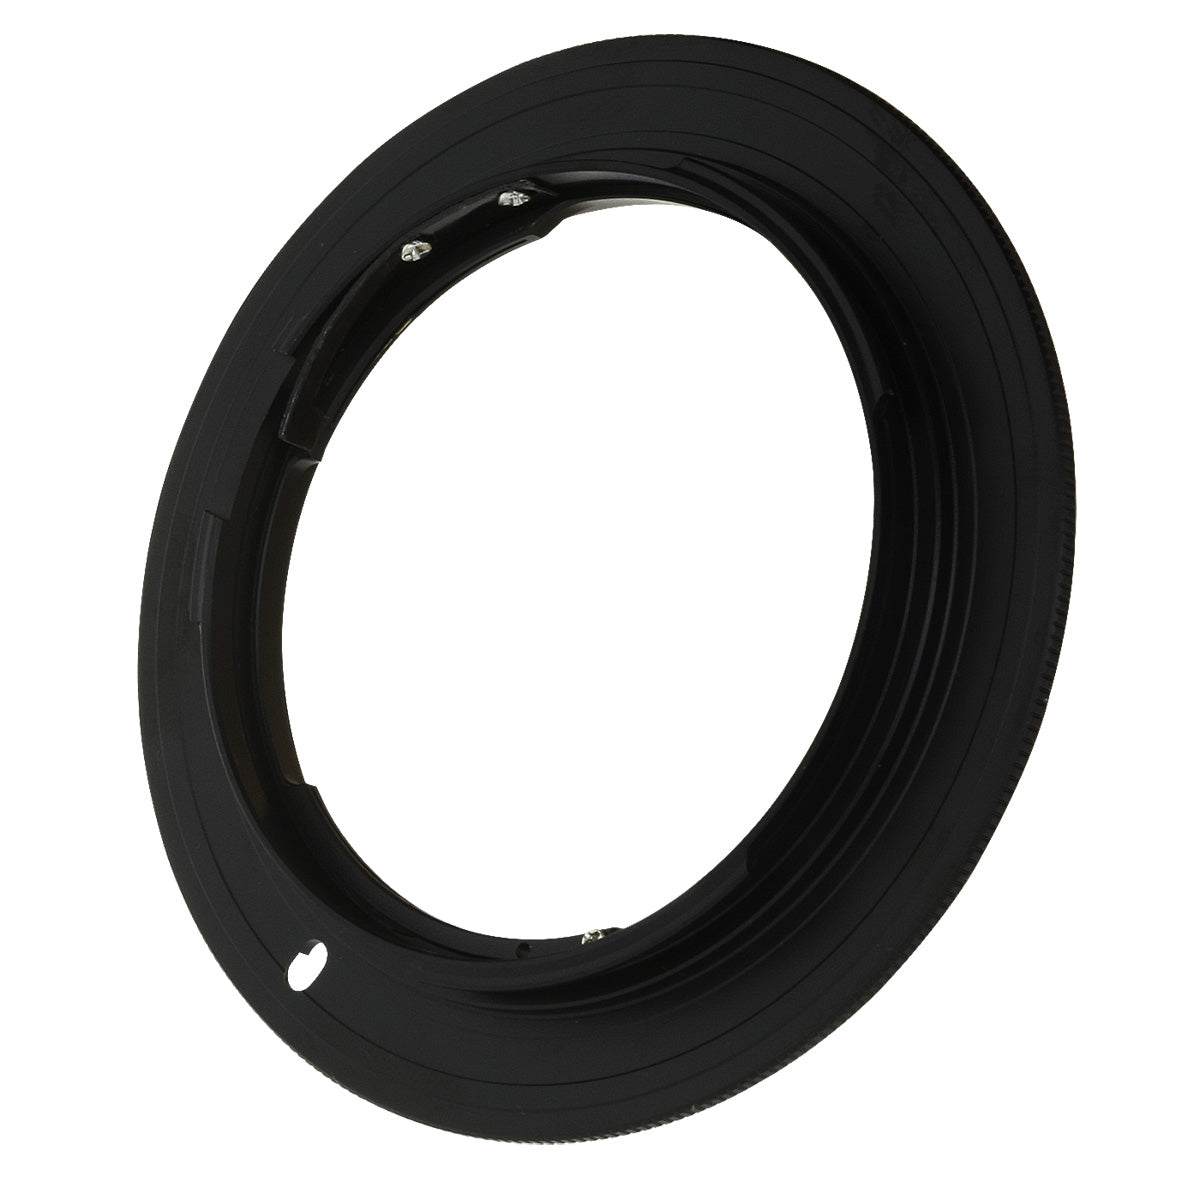 Haoge Lens Mount Adapter for Contax / Yashica C/Y CY mount Lens to Canon EOS EF EF-S Mount Camera